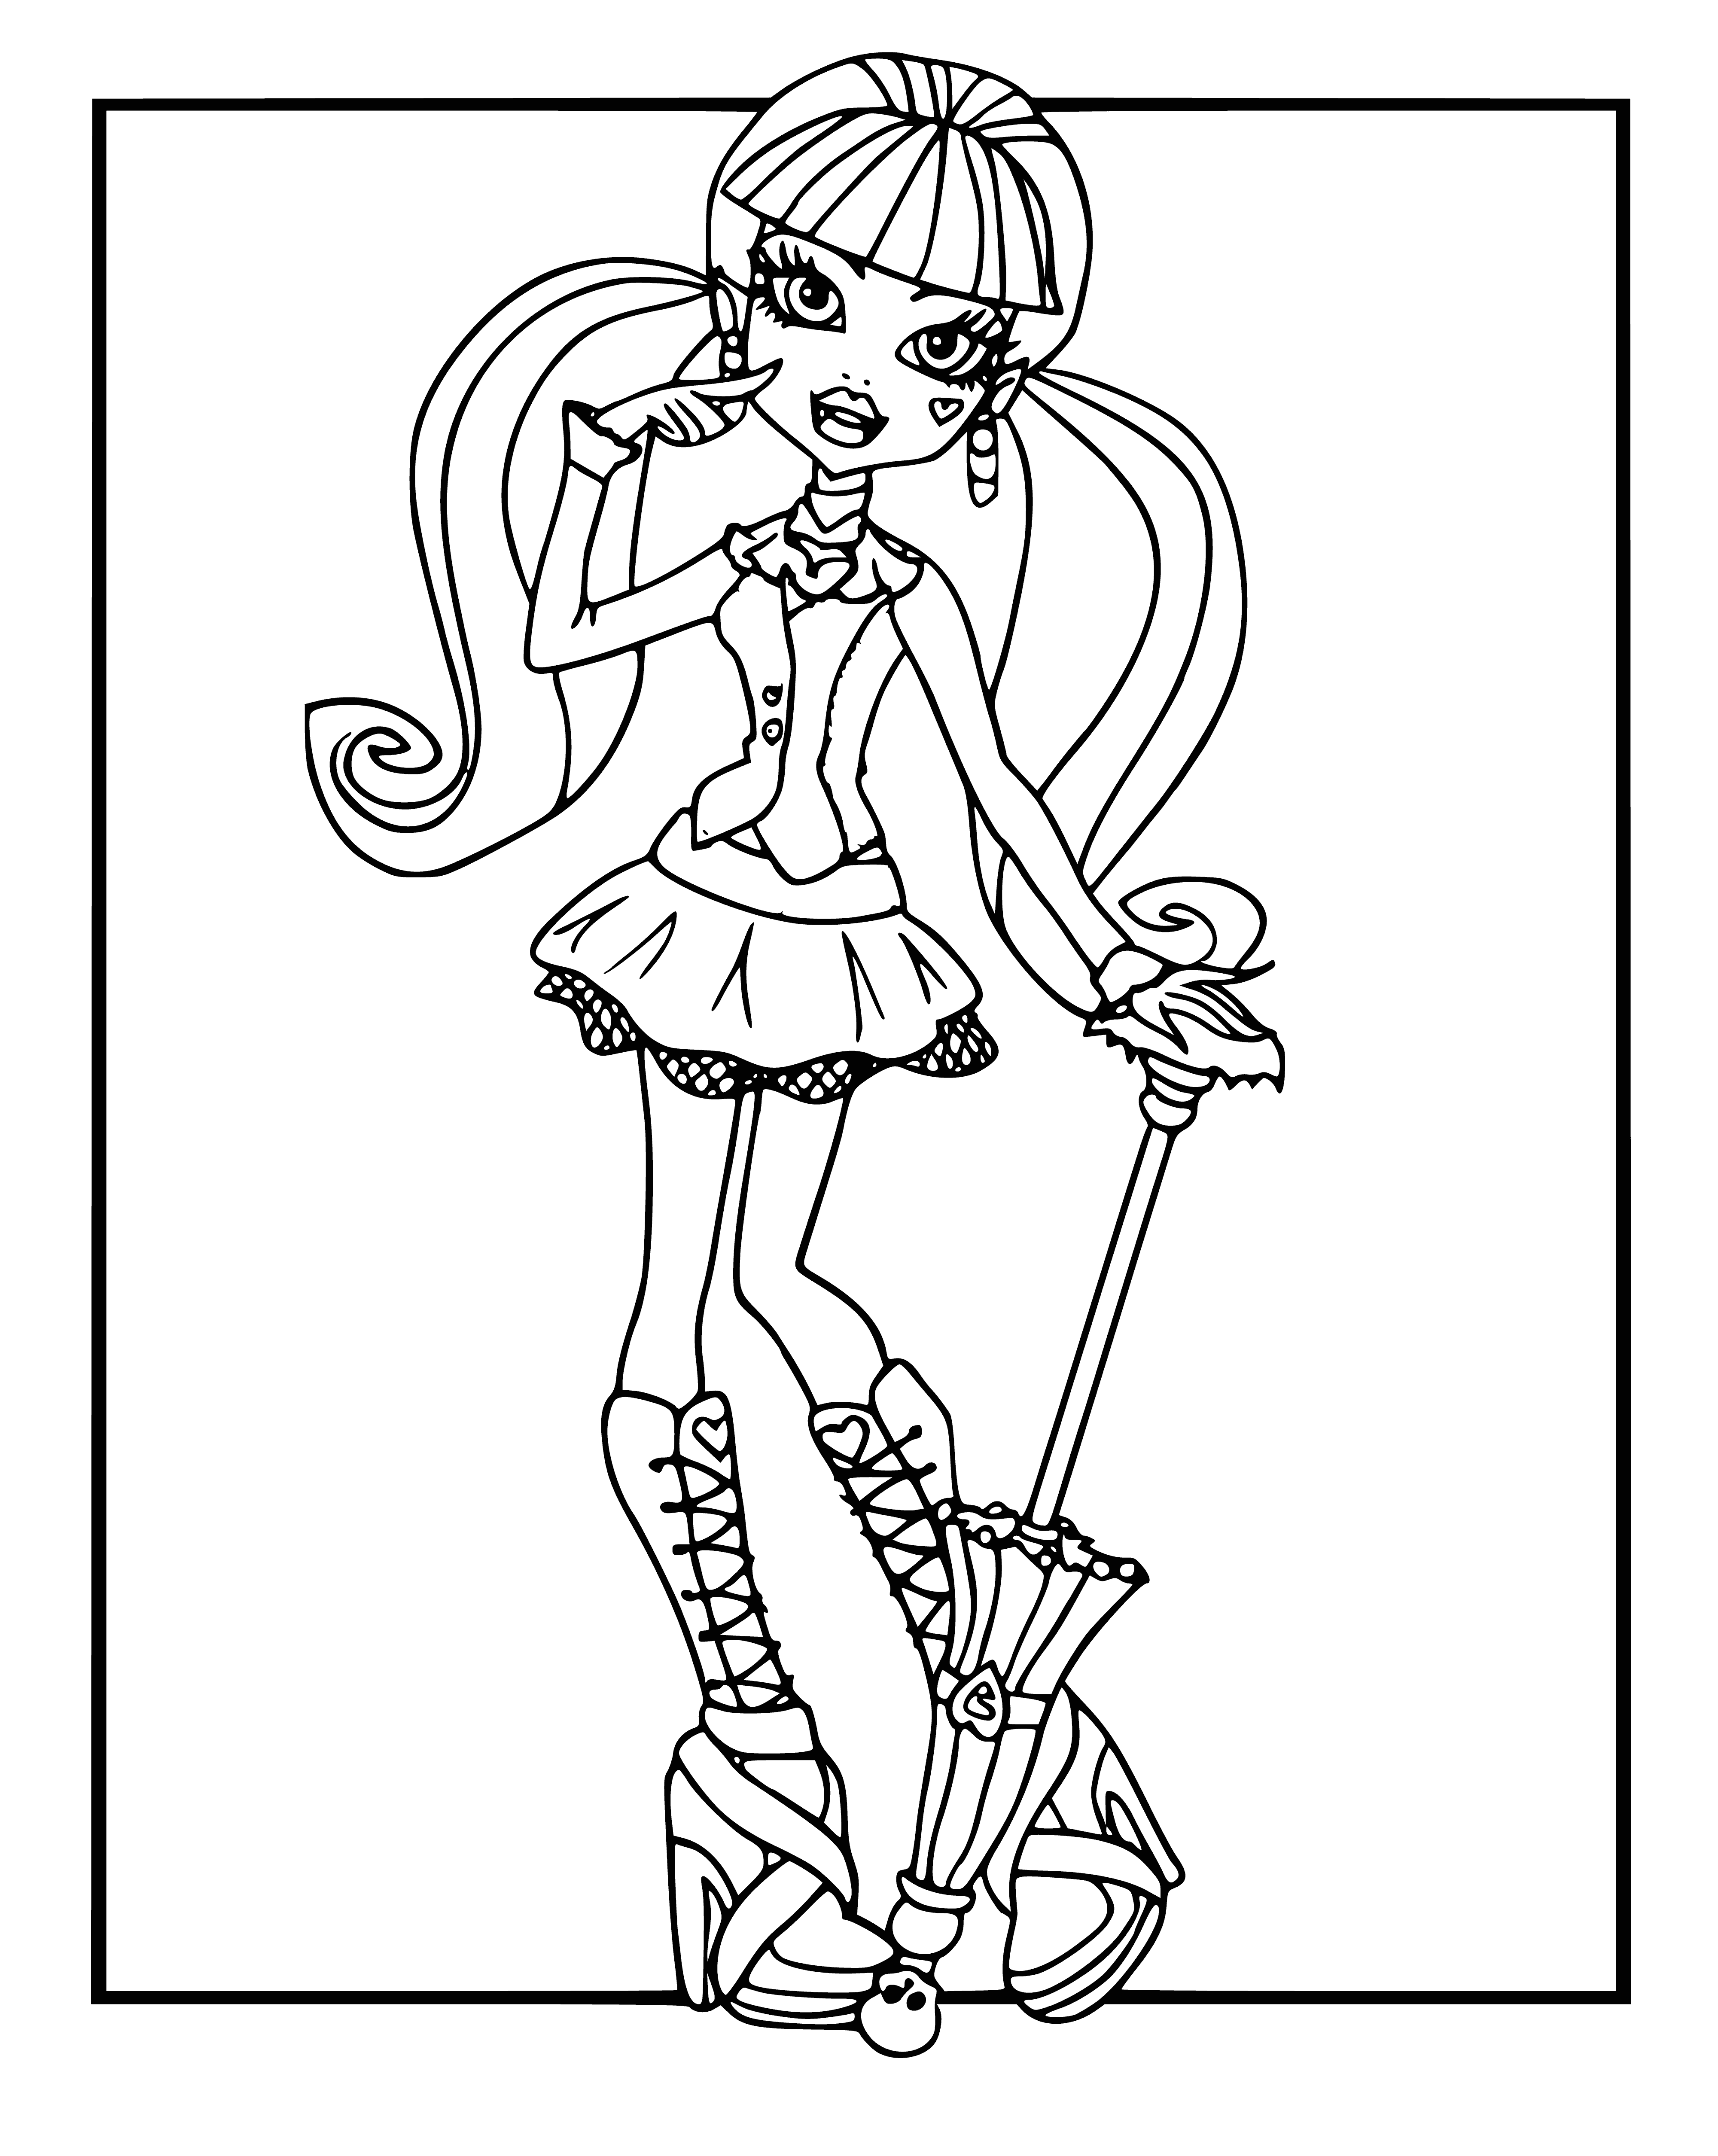 Draculaura holds an umbrella and wears a printed dress, purple cape, and styled hair with pink streaks. #MonsterHigh